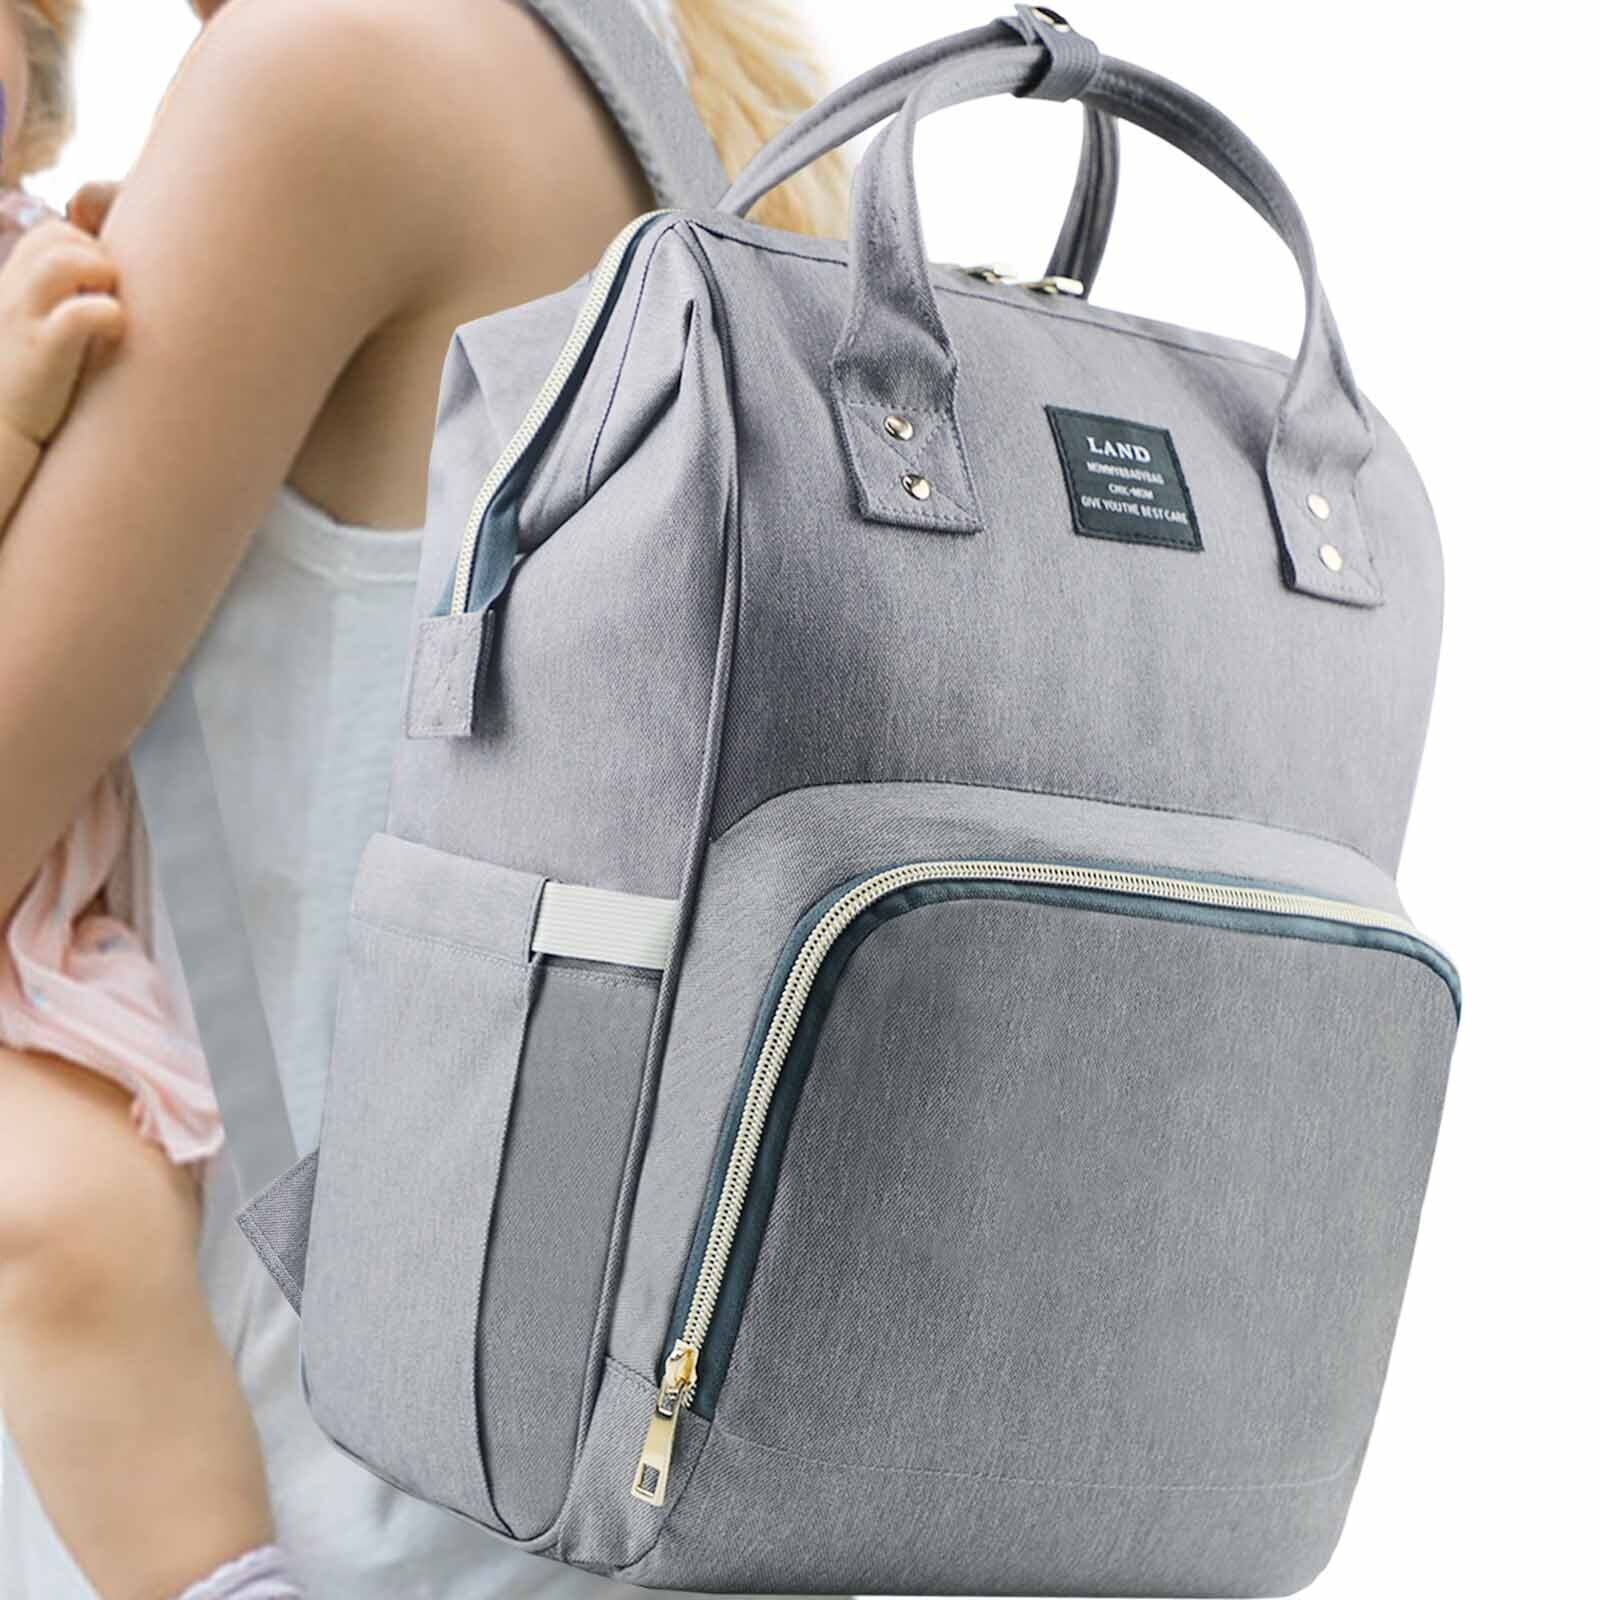 Mommy Maternity Diaper Bags Solid Fashion Large Capacity New Women Nursing Bag 